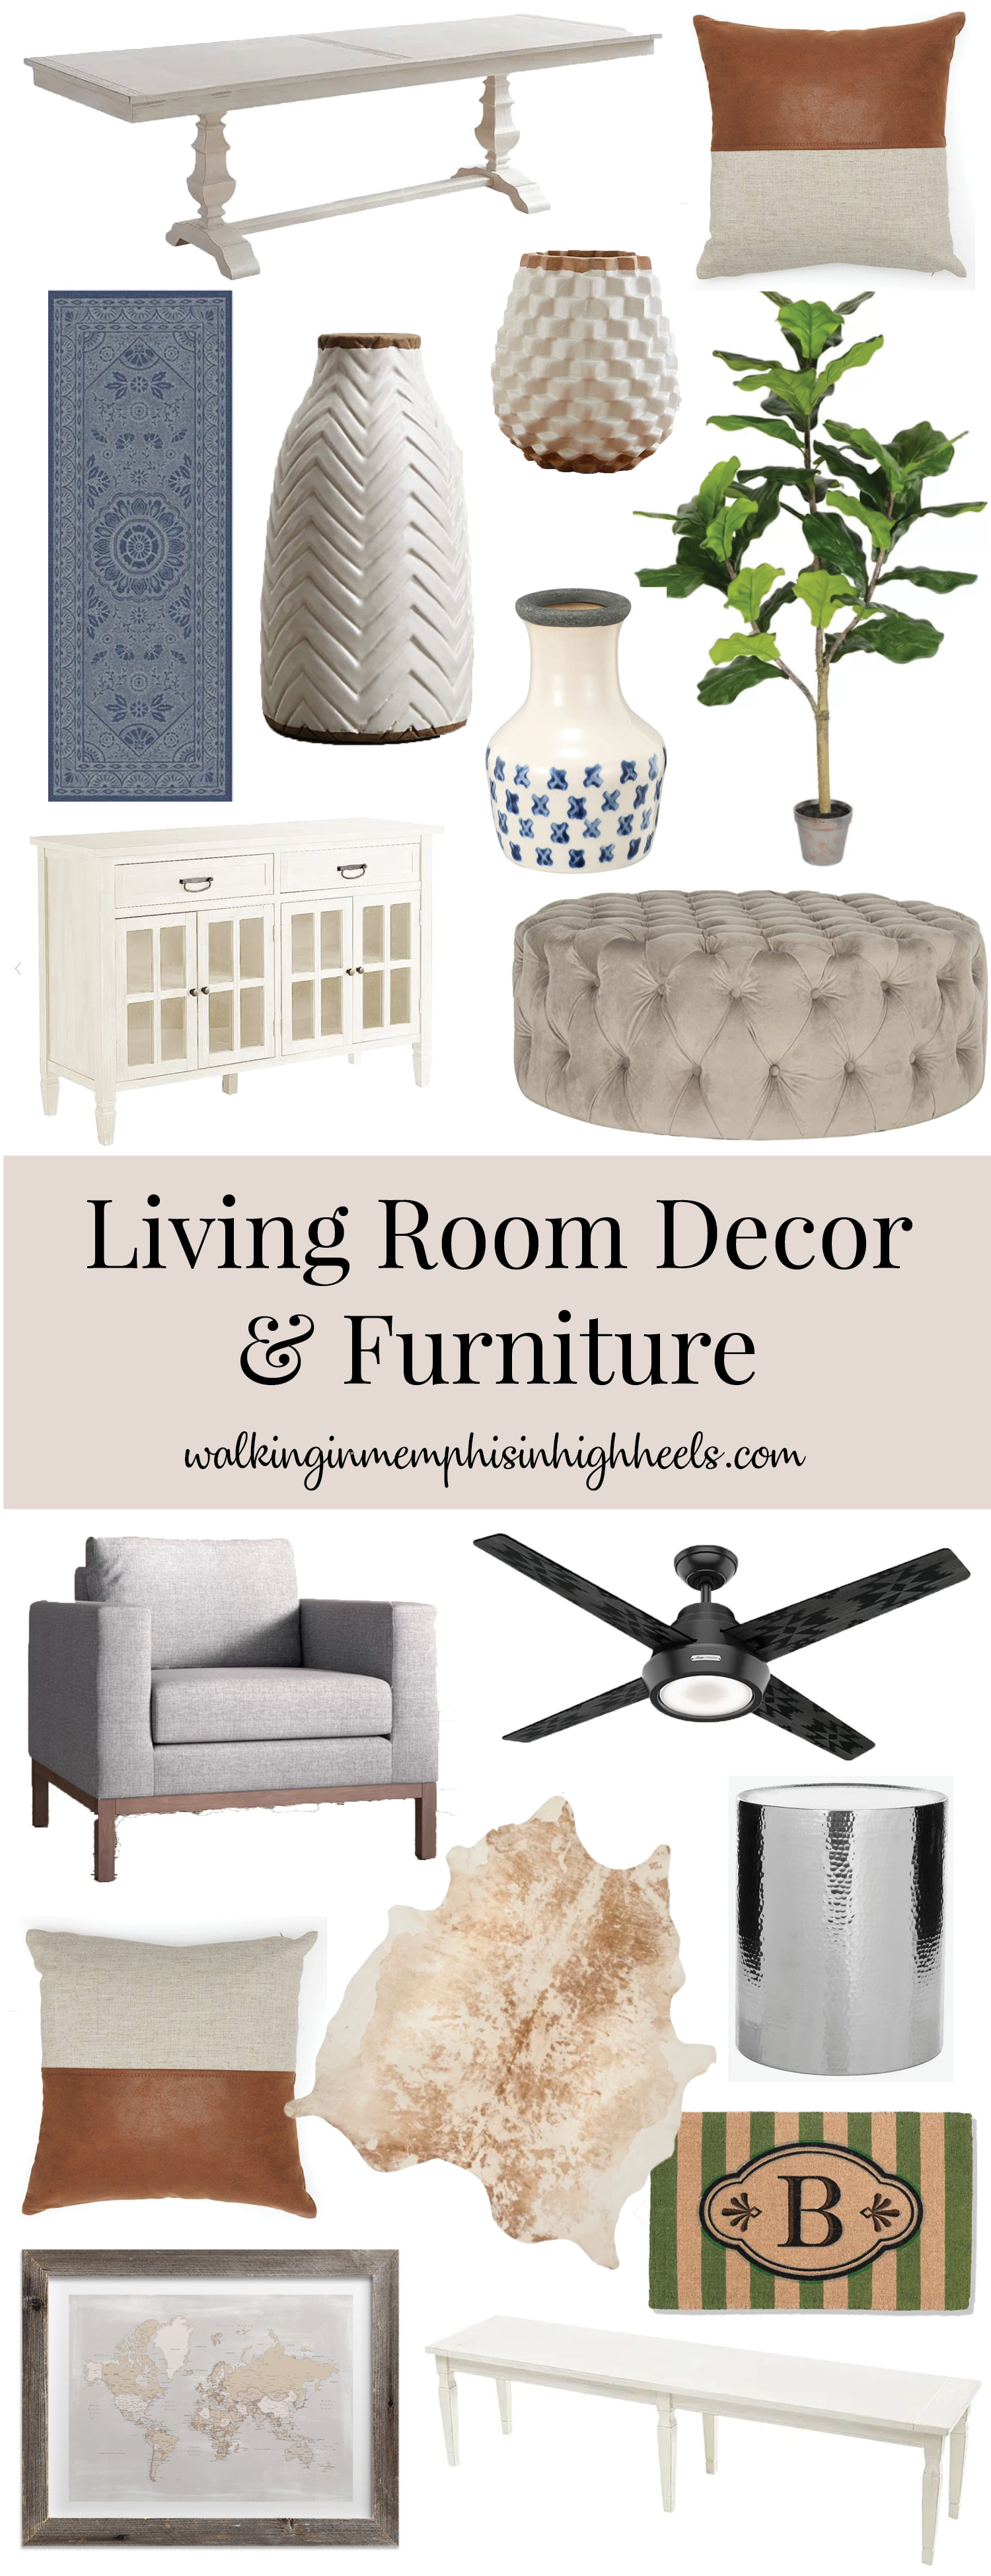 Living Room and Dining Room Furniture Top Picks featured by top Memphis lifestyle blog, Walking in Memphis in High Heels.